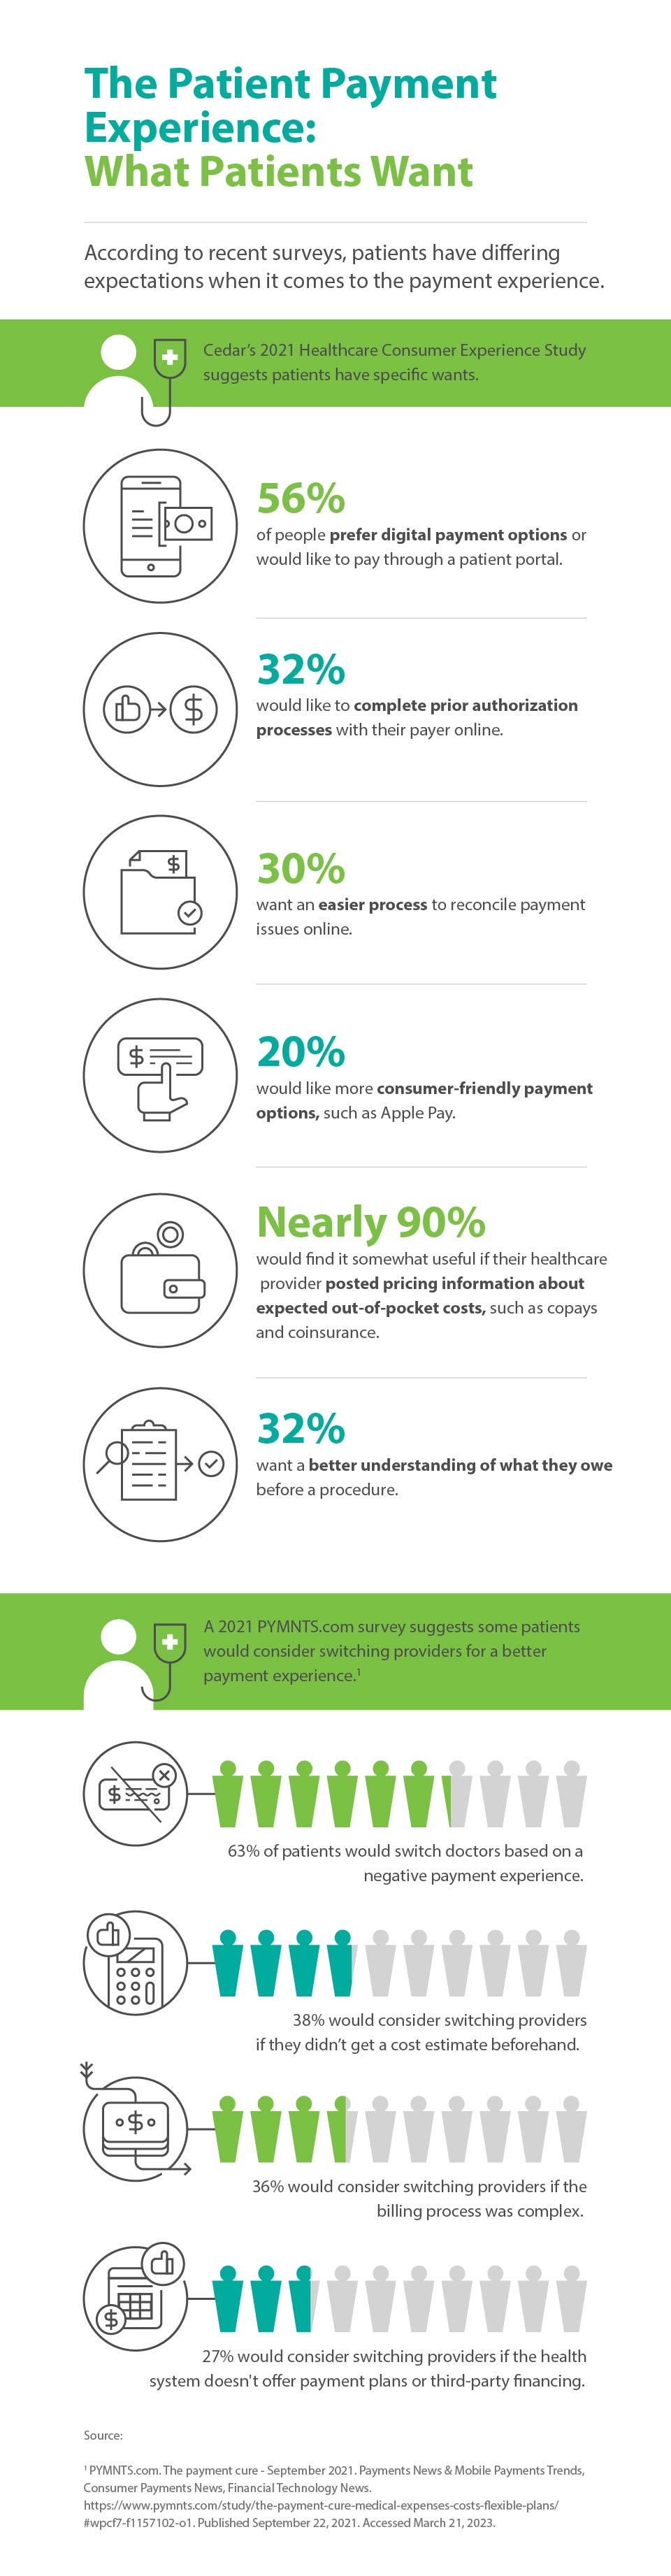 The Patient Payment Experience: What Patients Want